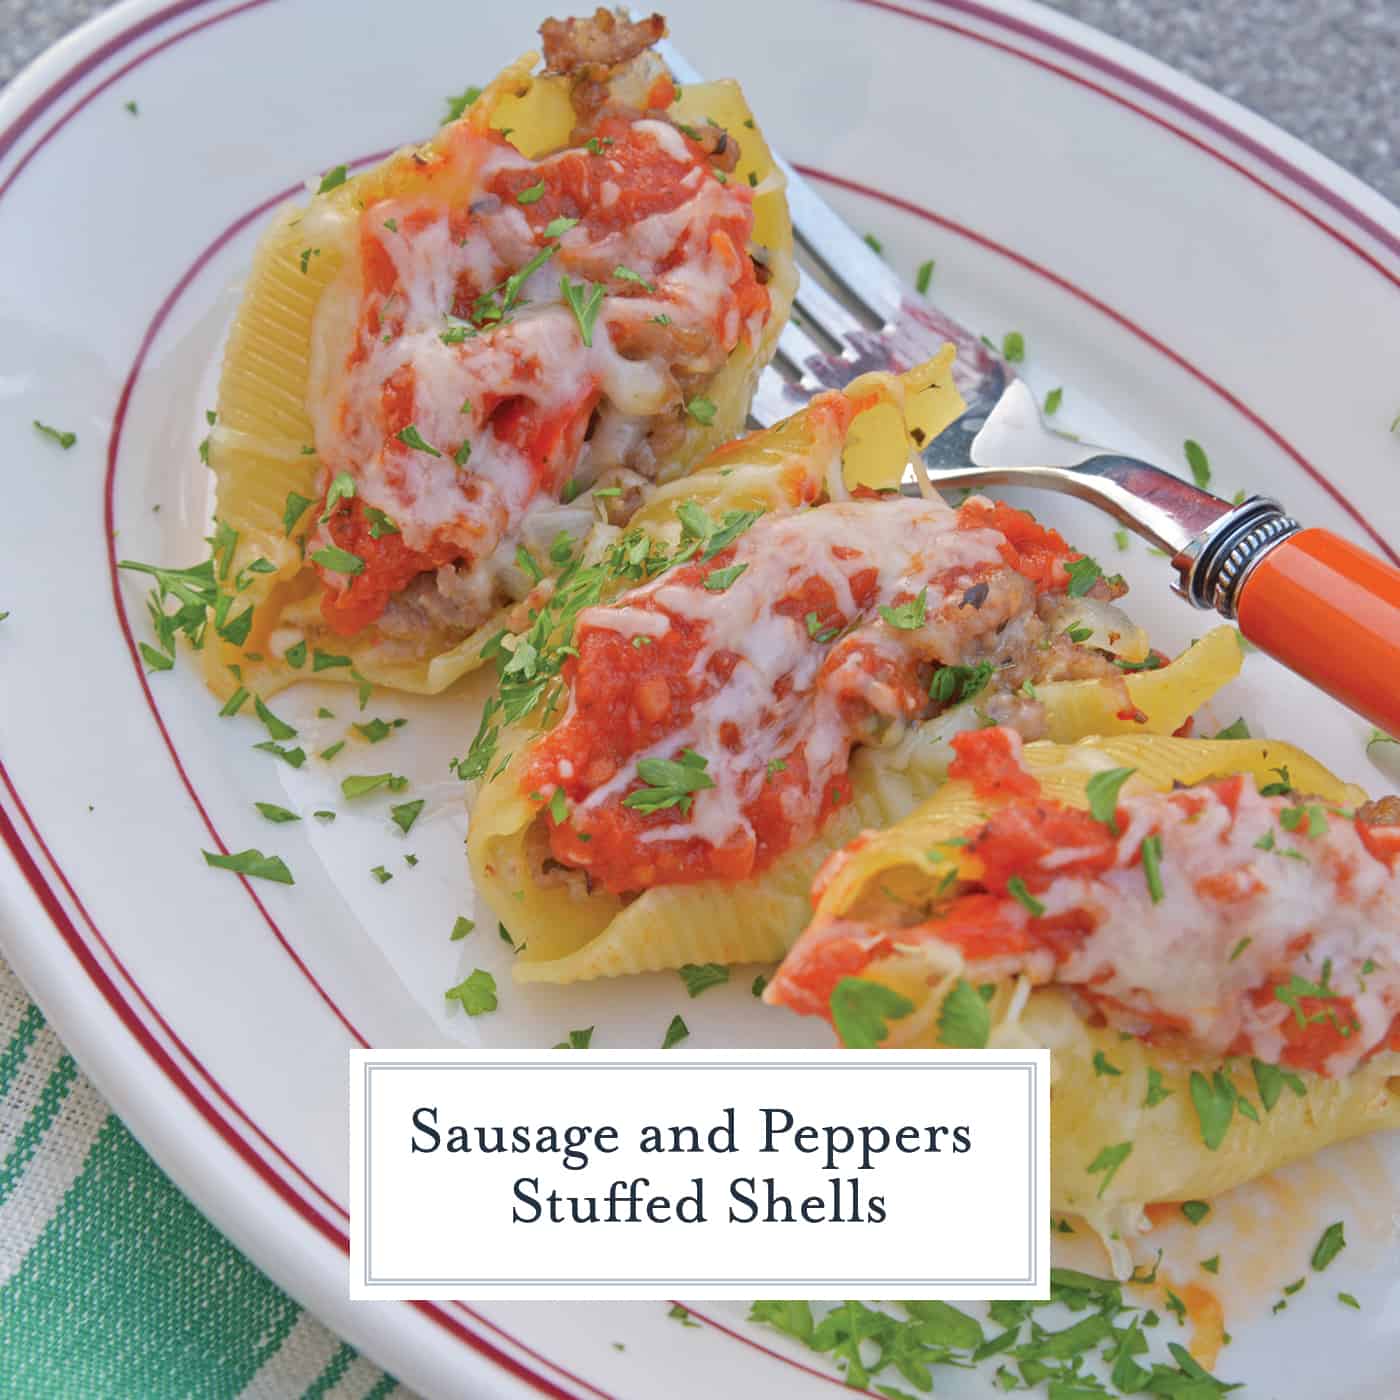 These Sausage and Peppers Stuffed Shells are a mashup of two fan favorites and are a fun way to spice up any weekday meal. They are guaranteed to wow!